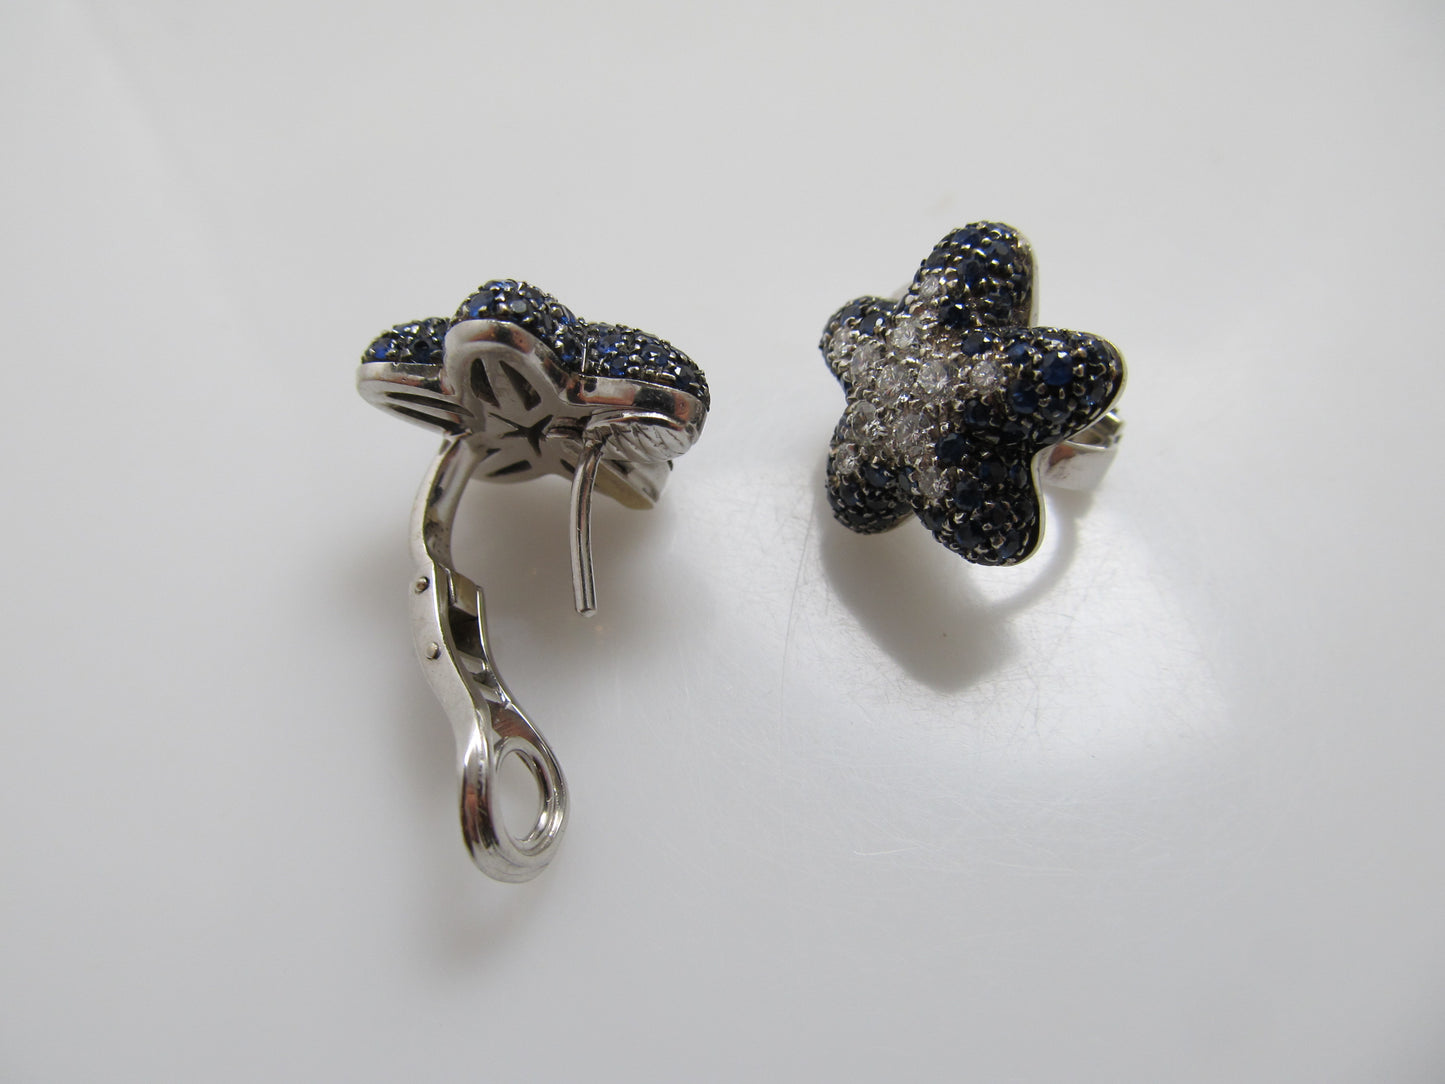 18k white gold starfish earrings with sapphire and diamonds